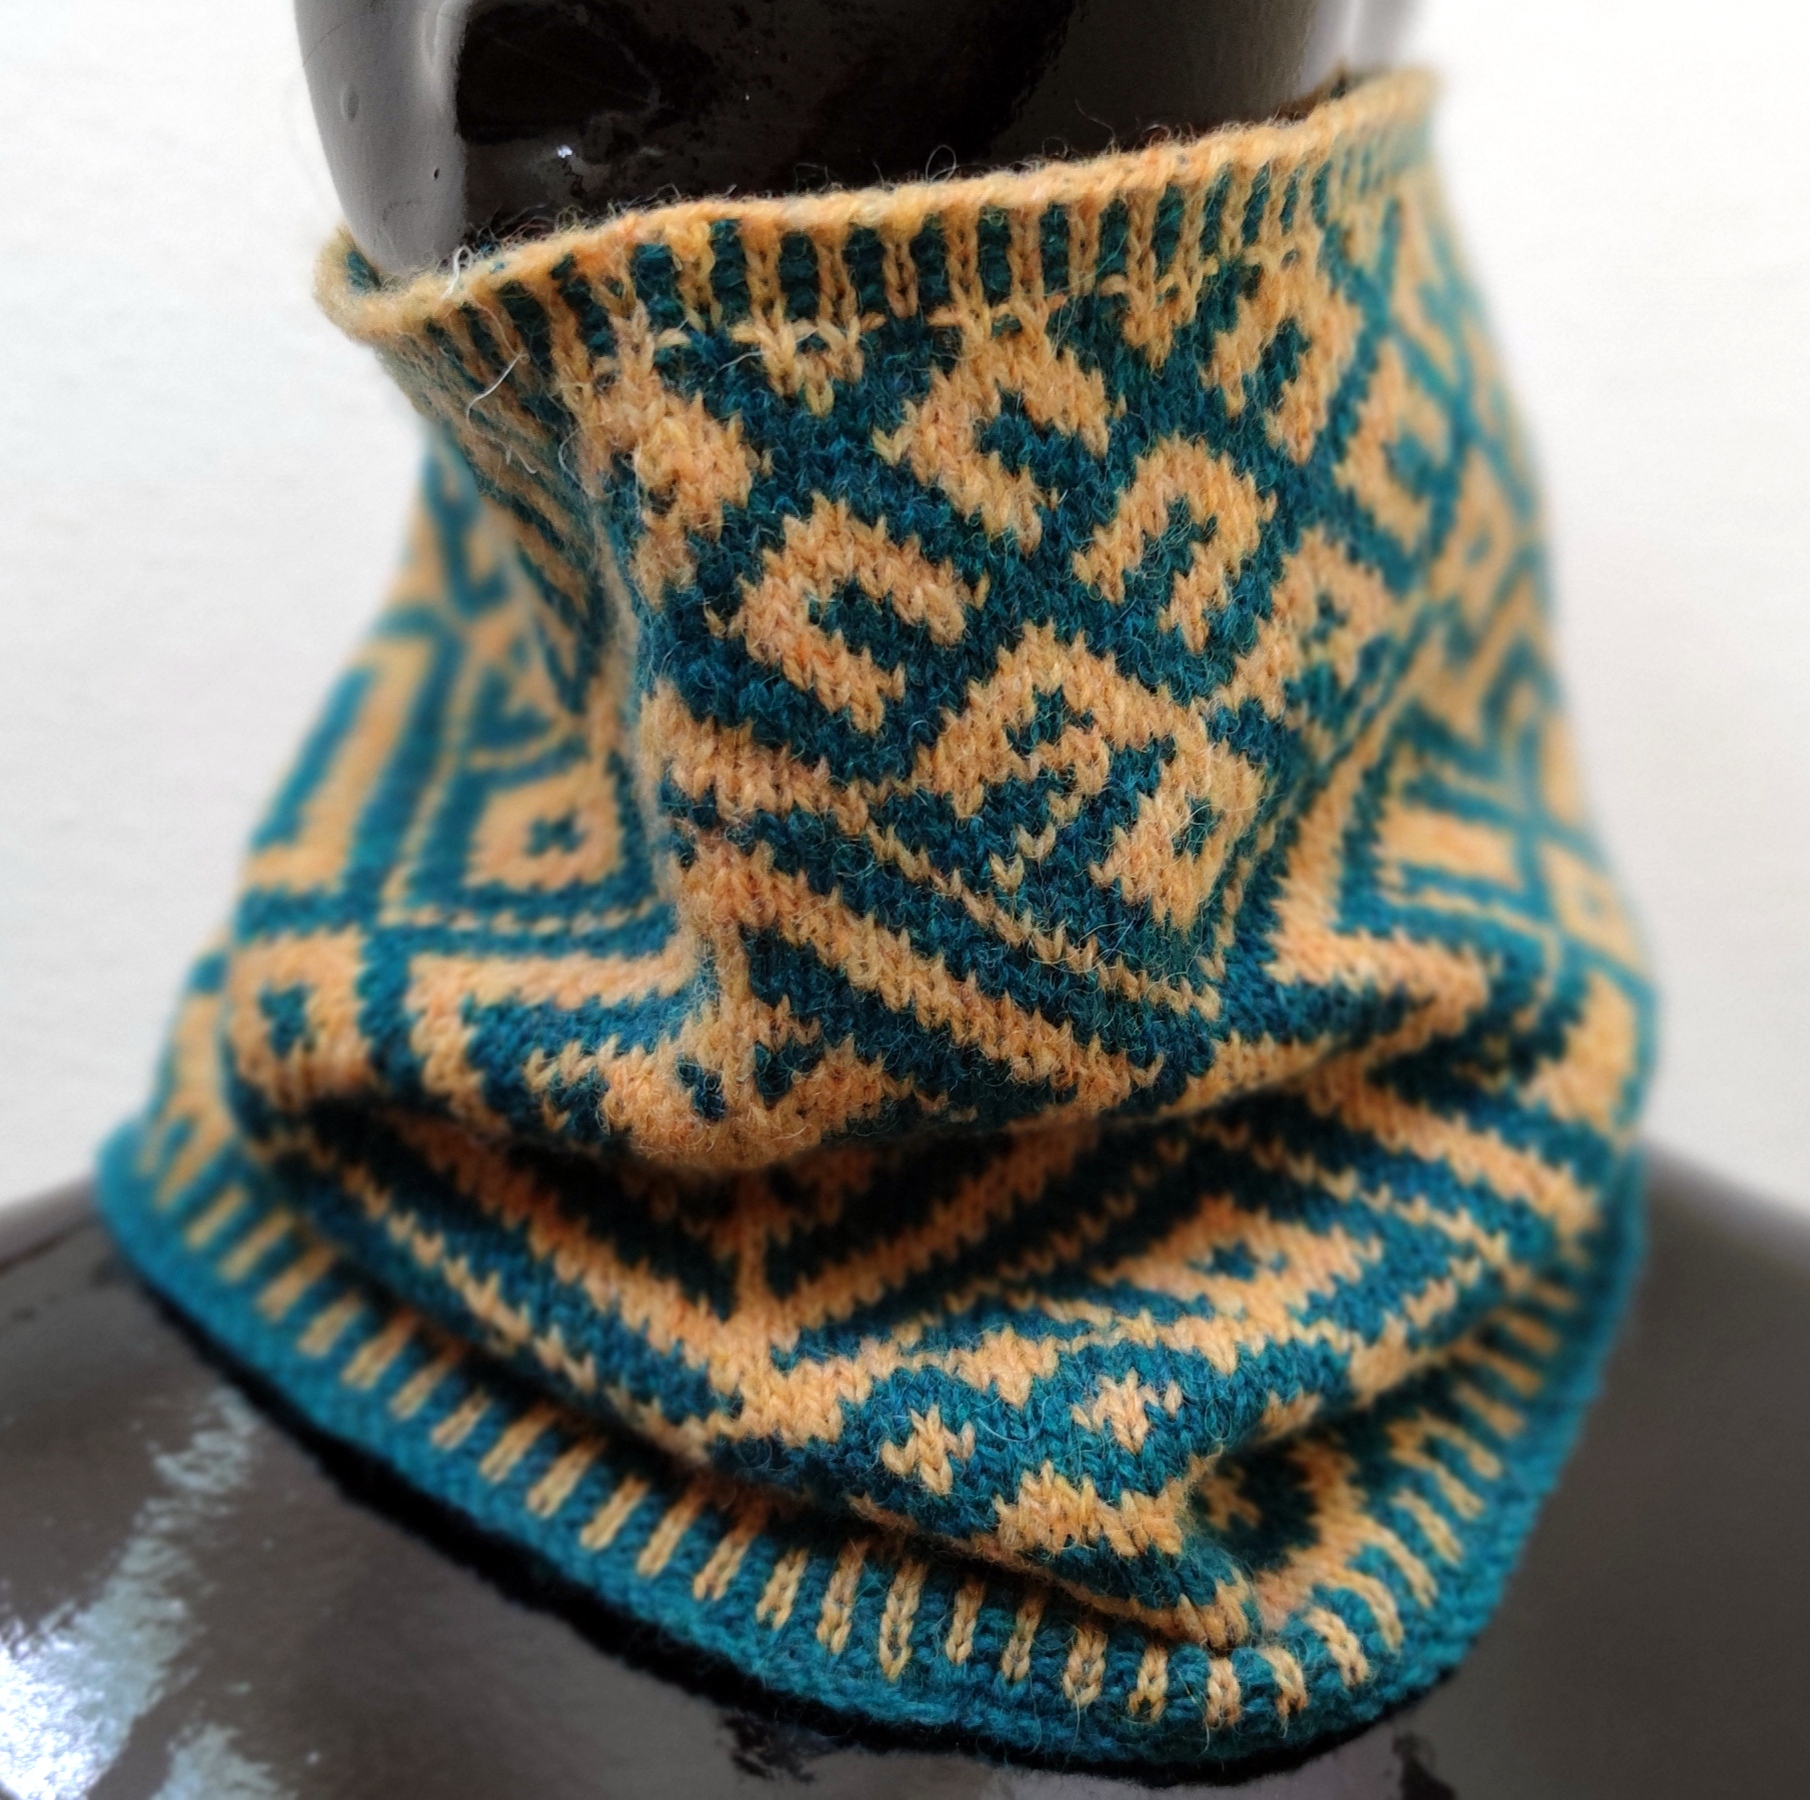 Embroidery-inspired Fair Isle Neck Warmer